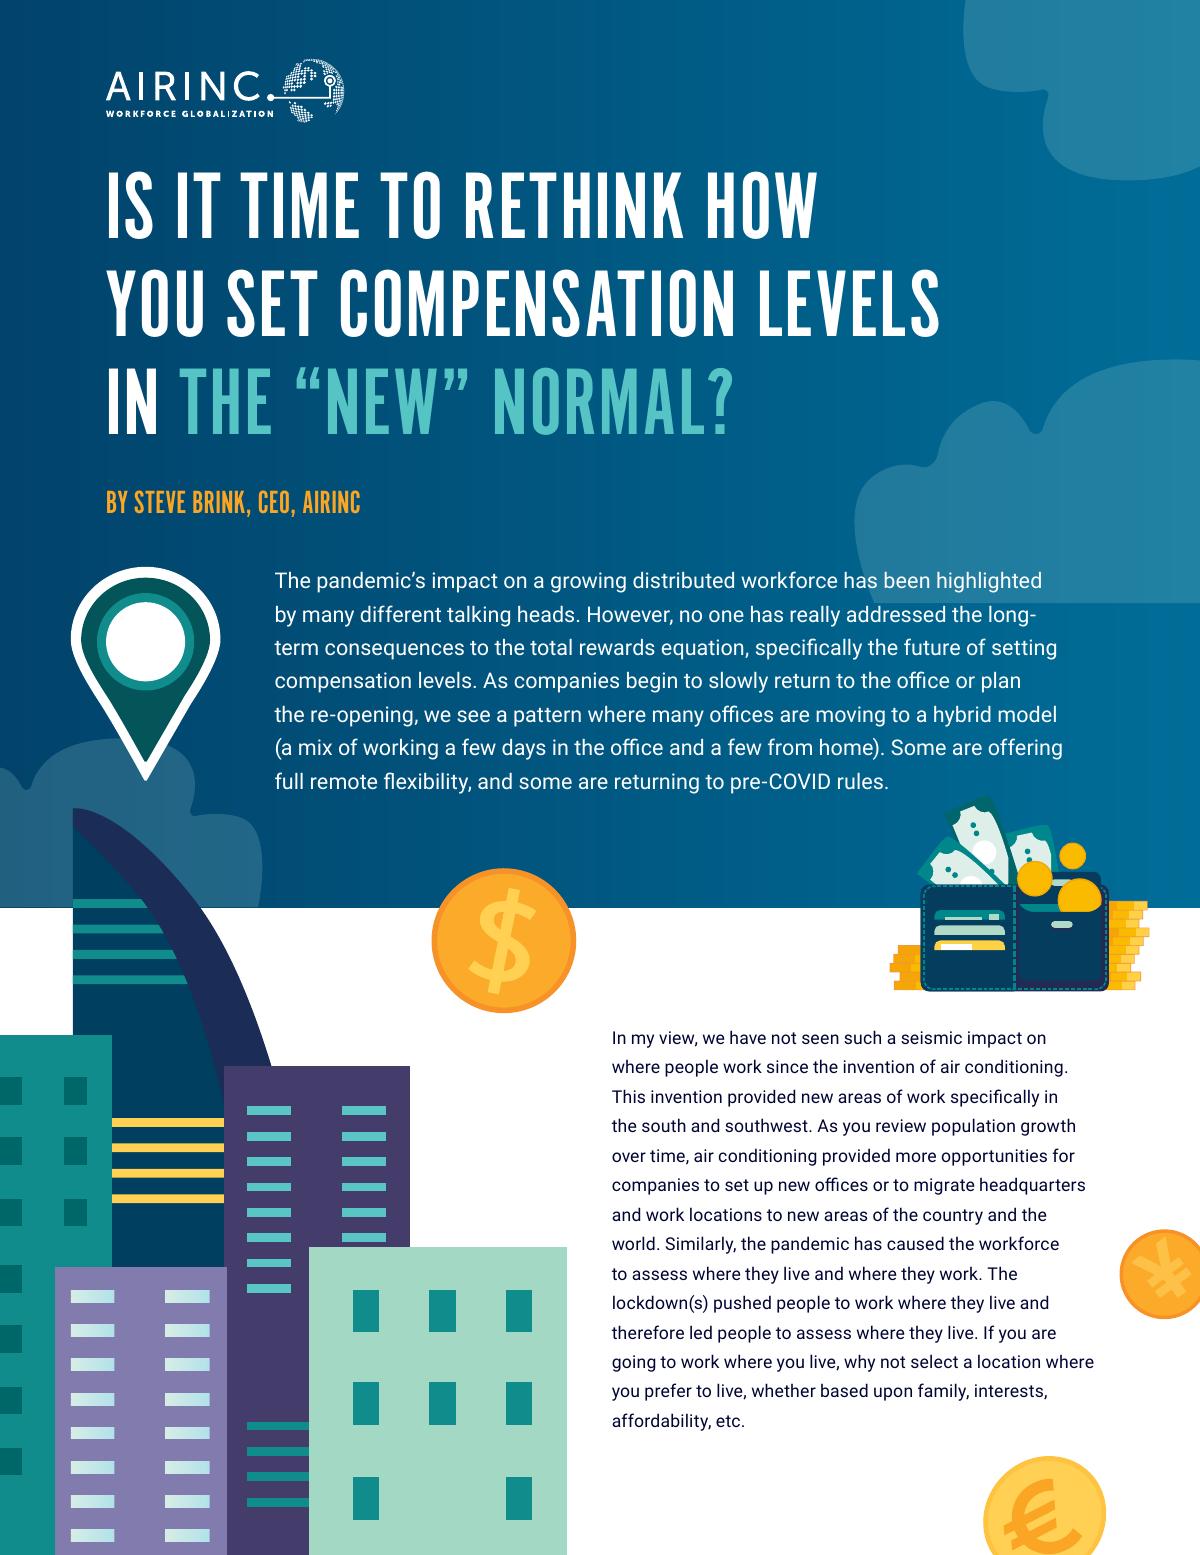 IS IT TIME TO RETHINK HOW  YOU SET COMPENSATION LEVELS IN THE “NEW” NORMAL?